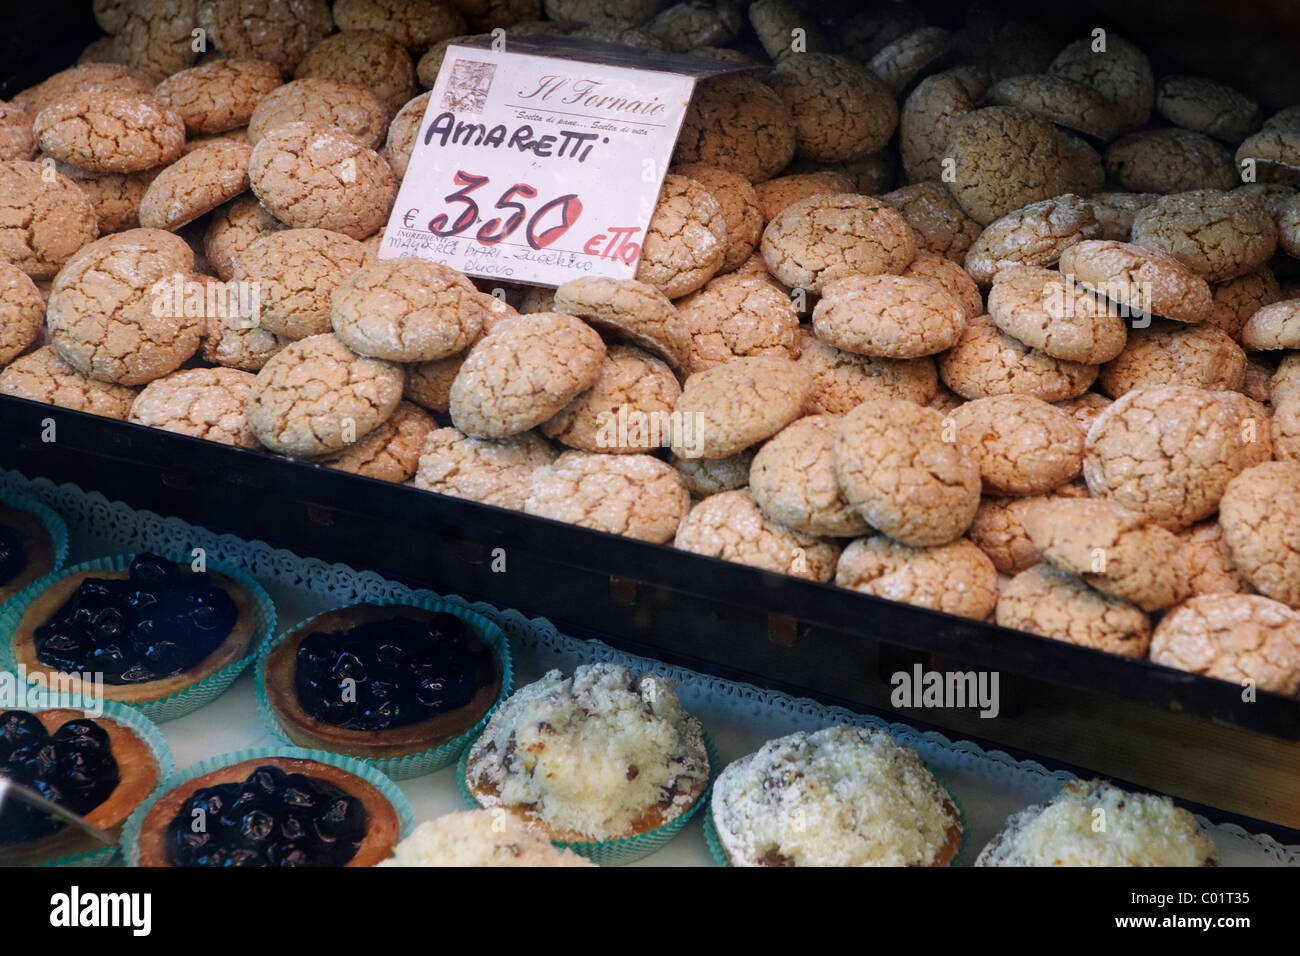 Amaretti biscuits in a bakery in Rome, Italy Stock Photo